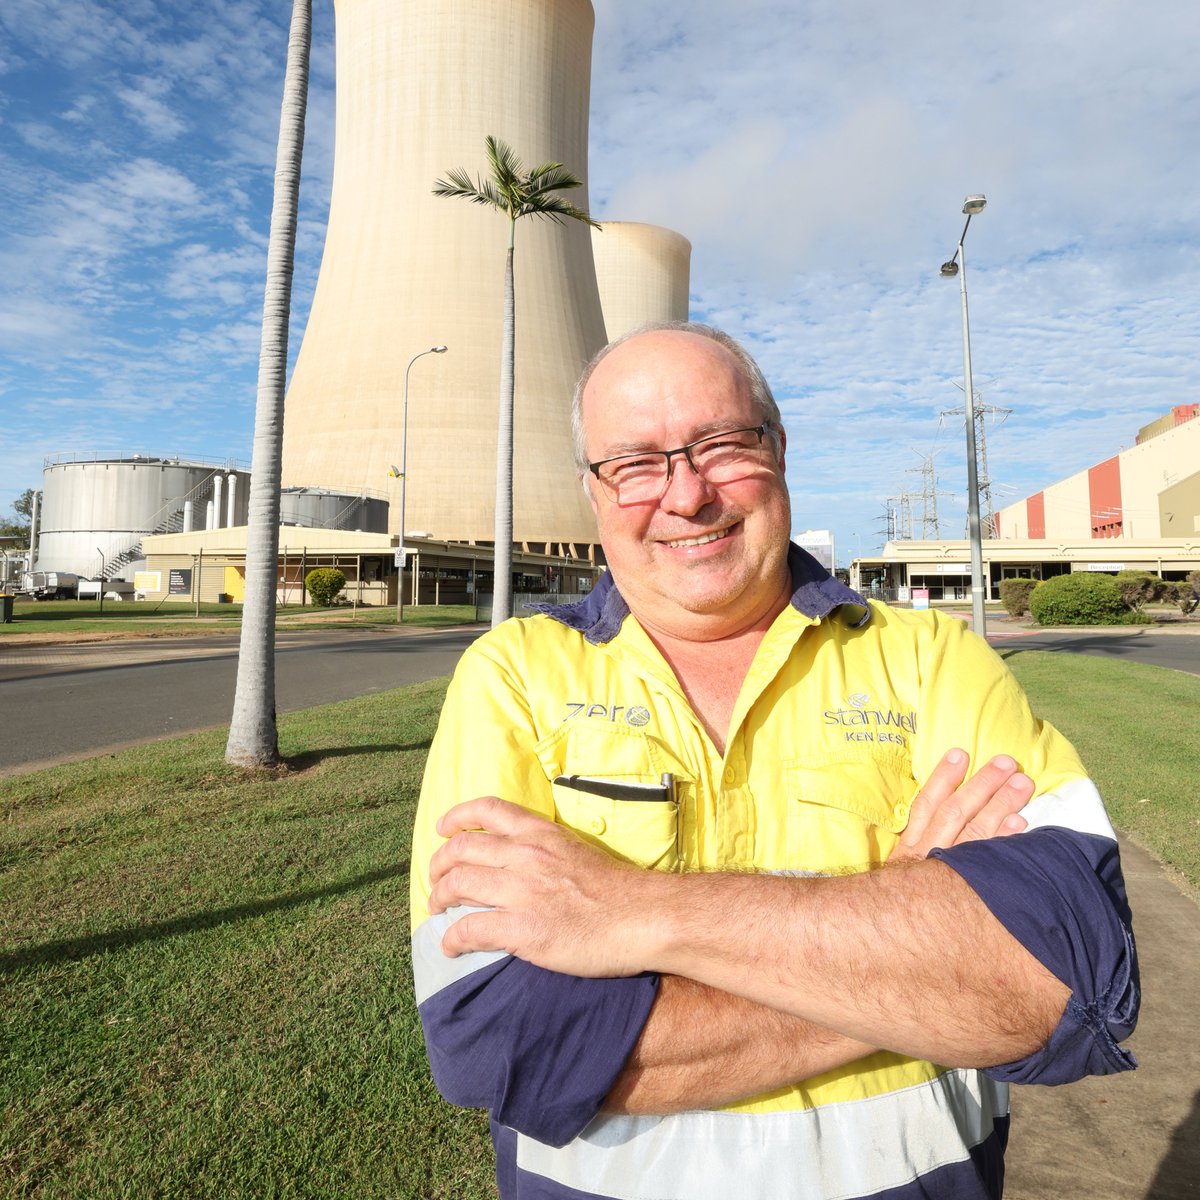 Ken has worked at Stanwell Power Station for 31 years and counting. The LNP tried to sell it off, putting jobs like Ken’s at risk. We kept it in public hands and protected those jobs. Now we’re building Queensland's biggest battery here.